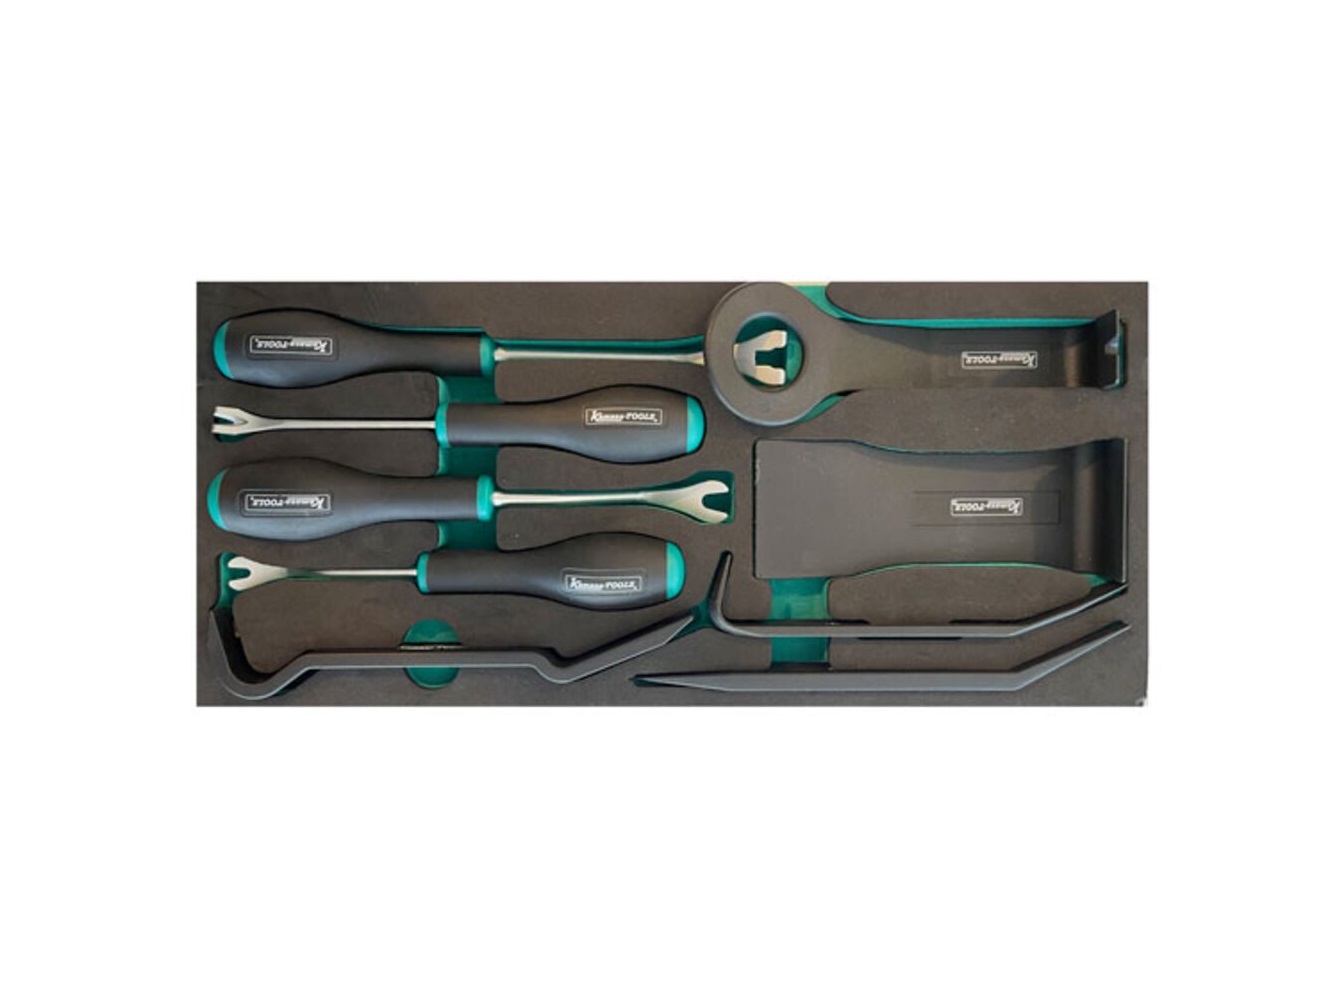 9pcs Disassembly tool set » Toolwarehouse » Buy Tools Online